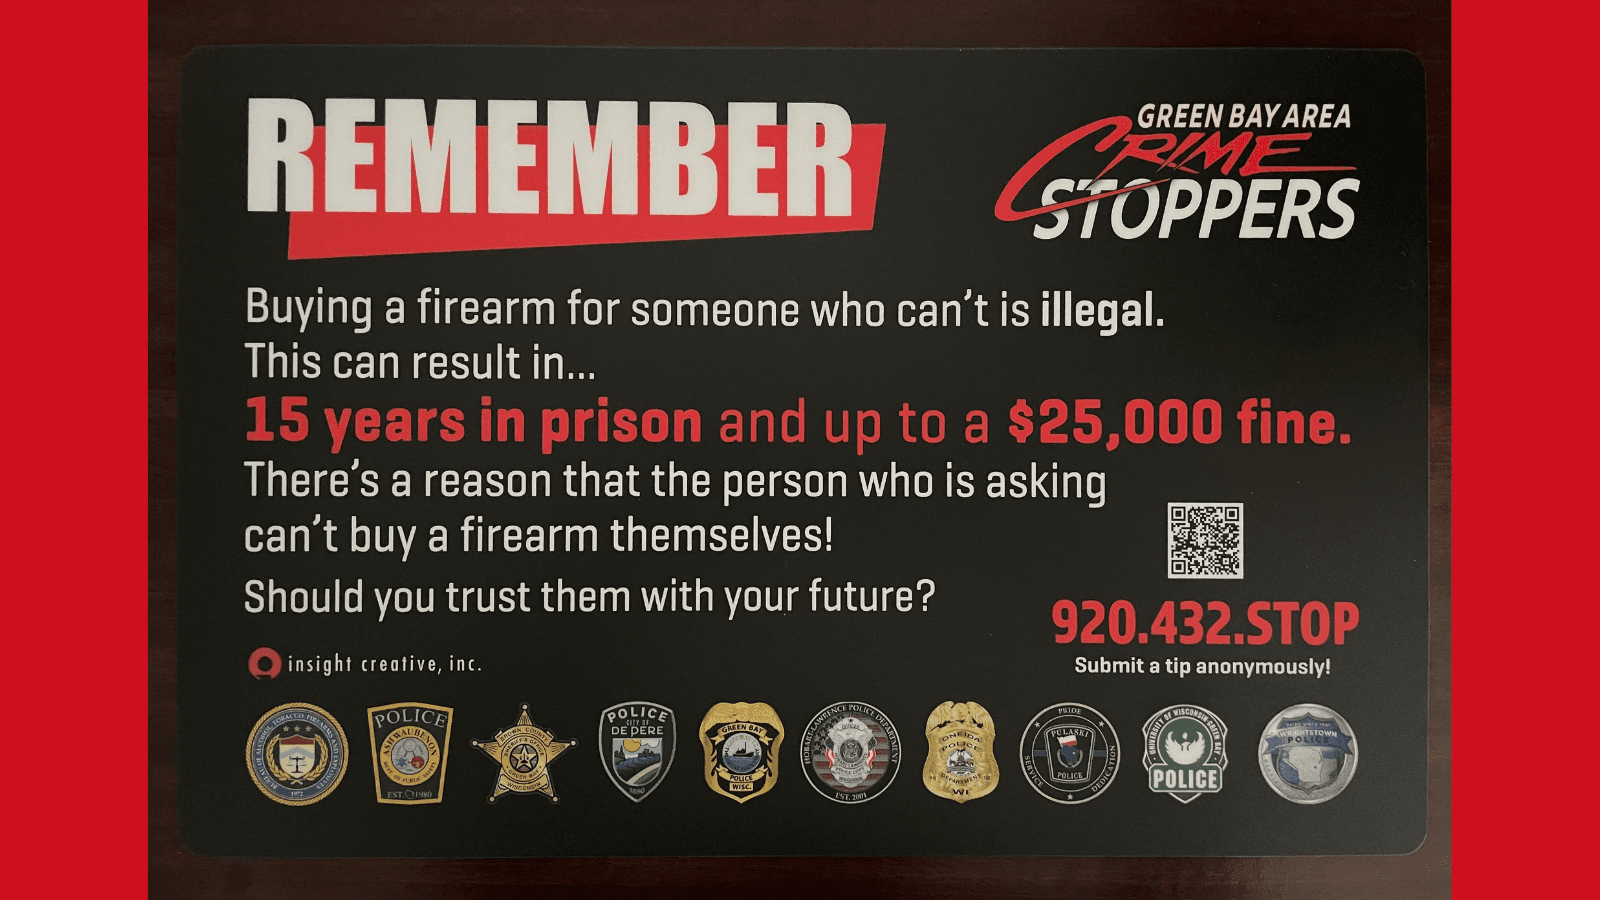 Brown County partners with ATF and Crime Stoppers to deter illegal firearm purchases